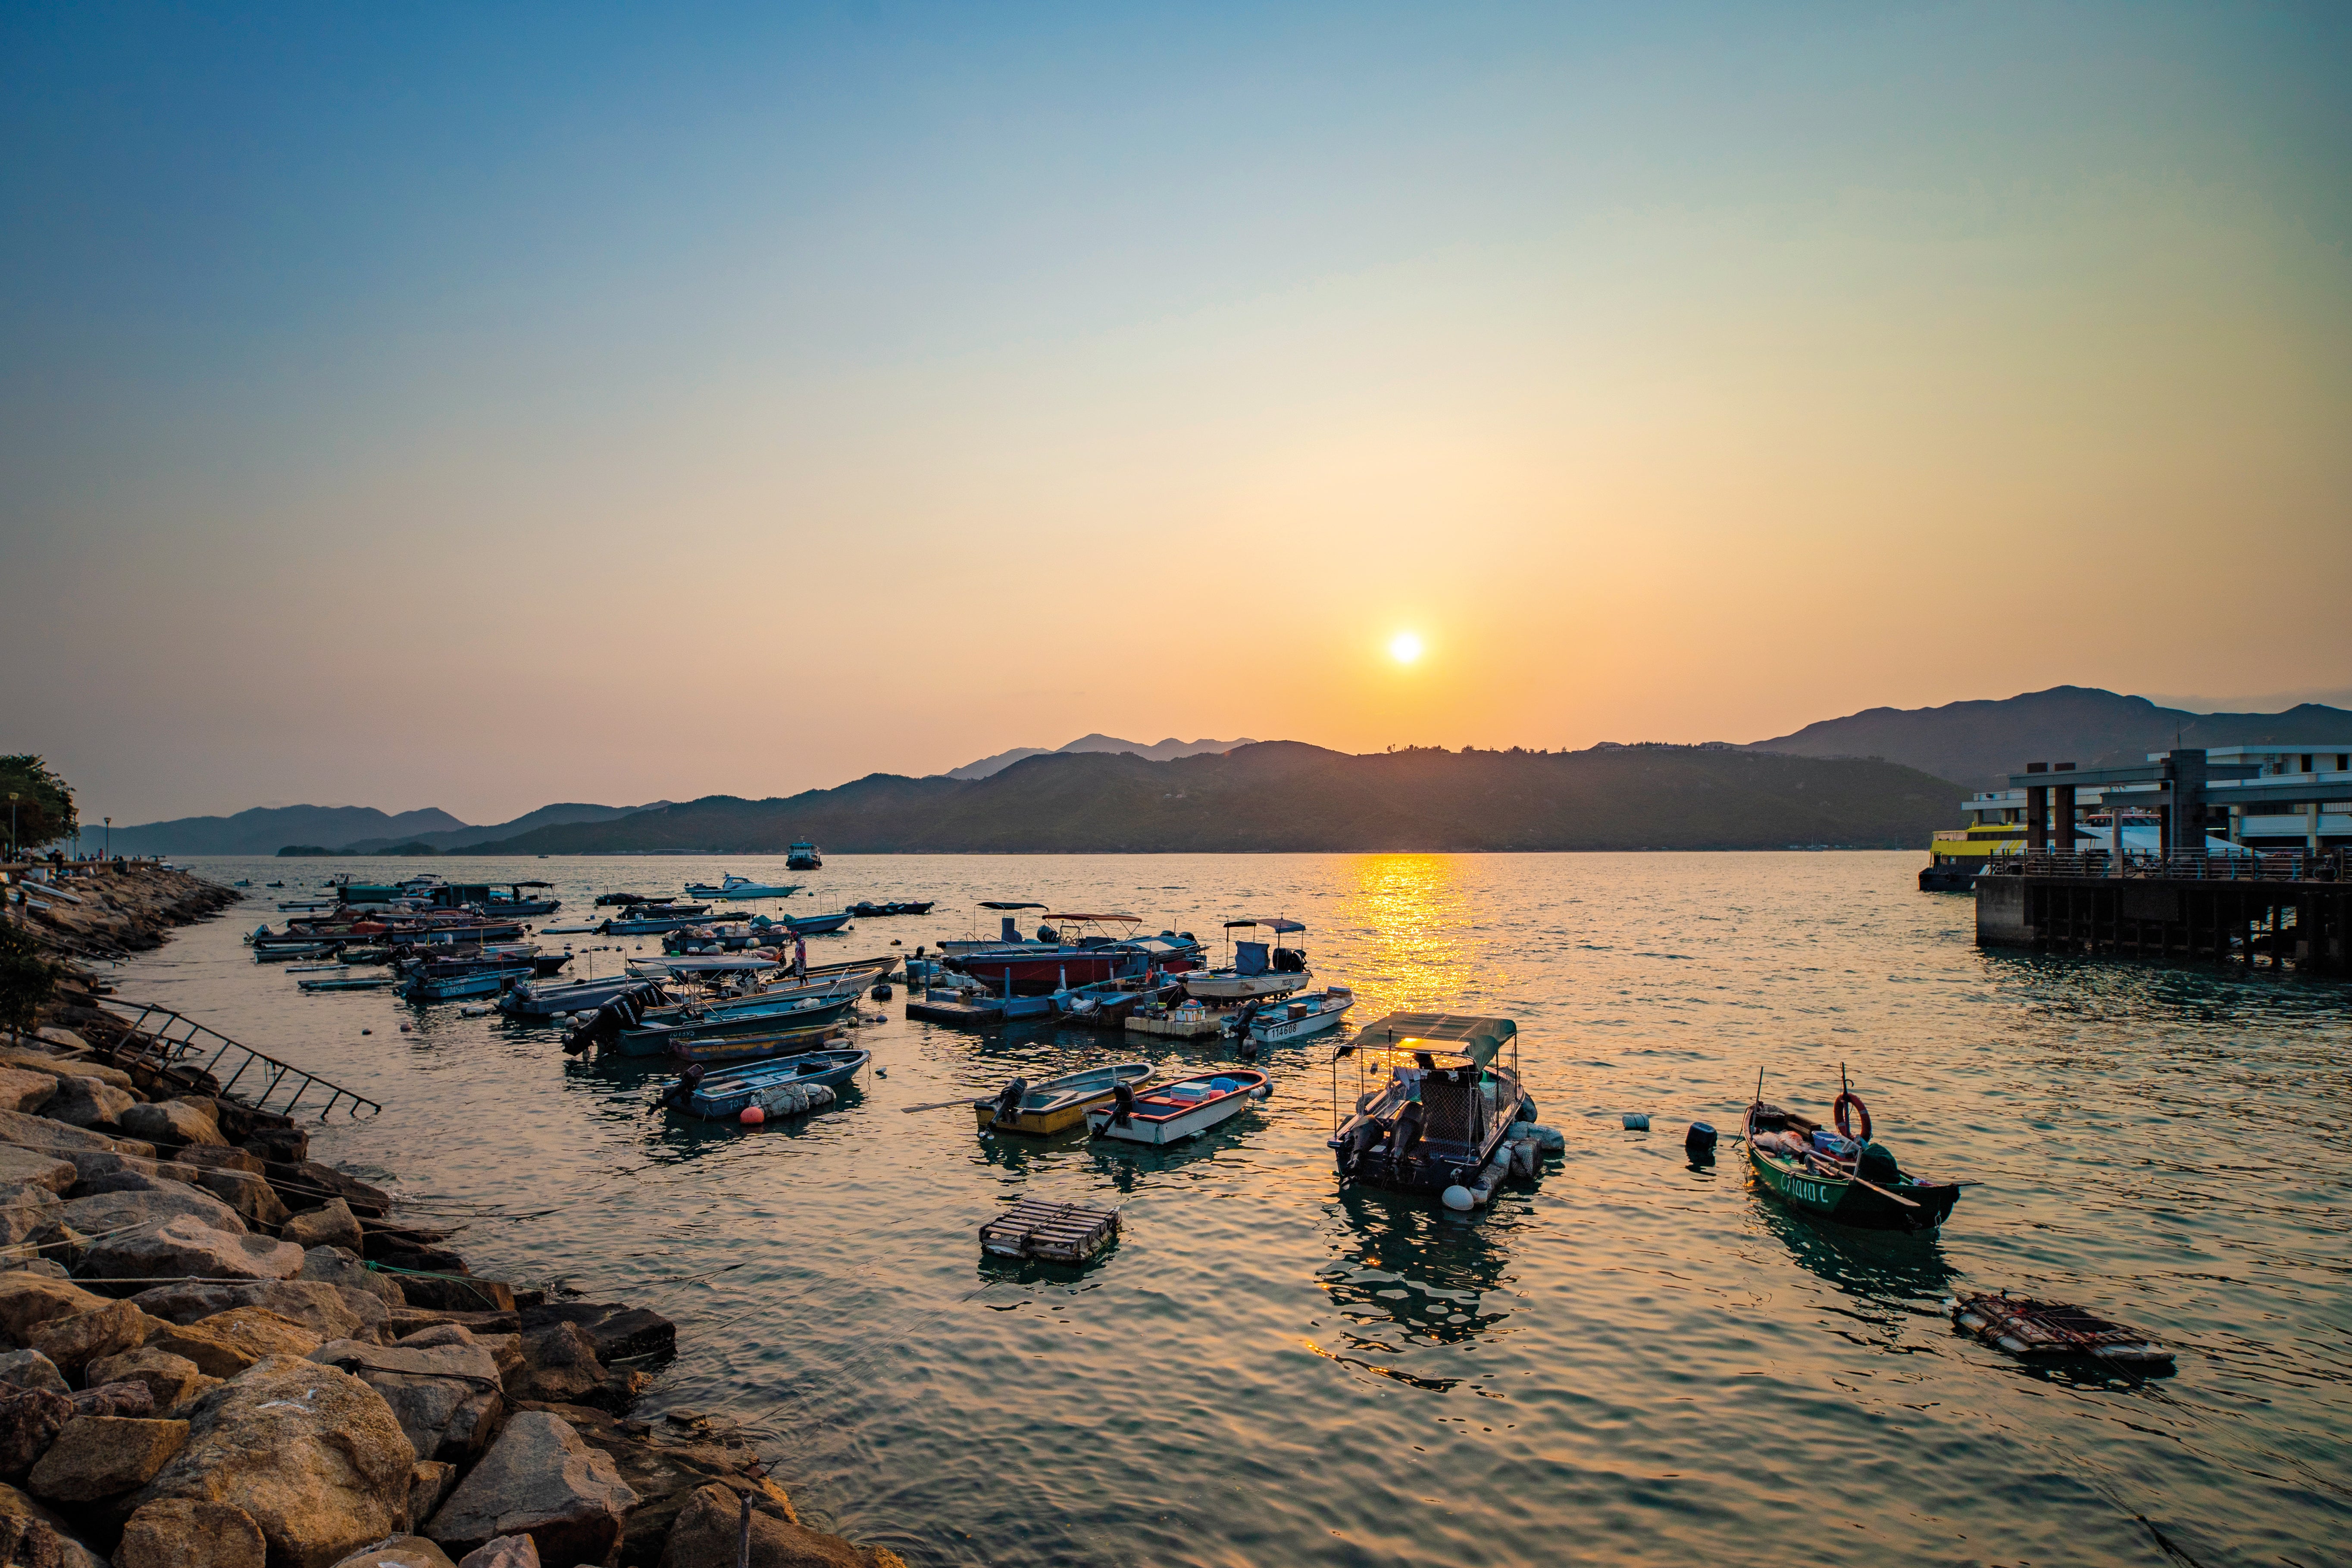 The picturesque fishing village of Peng Chau is the place to go for sensational seafood and gentle hikes